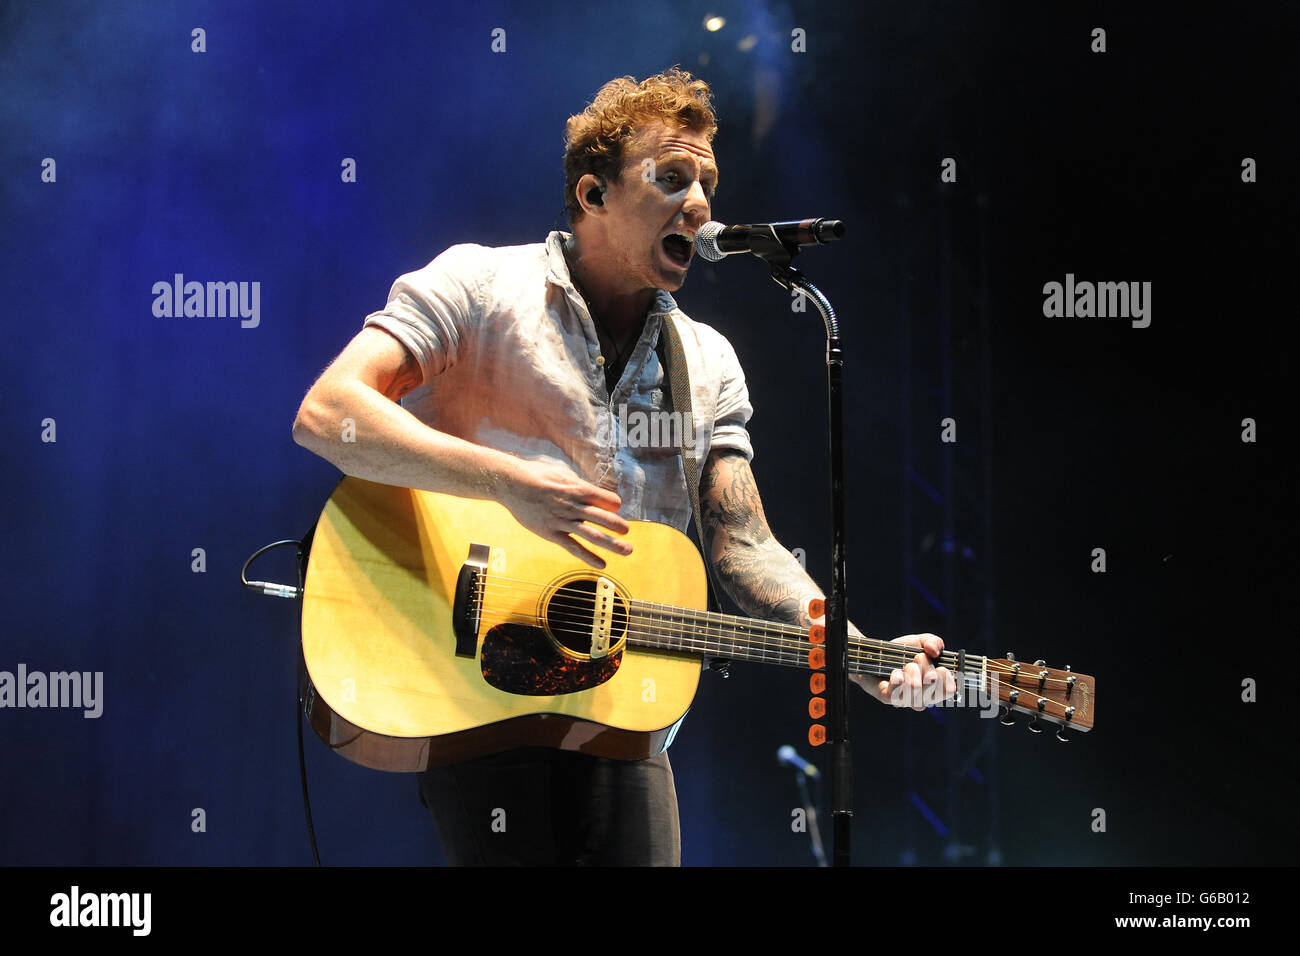 Danny Jones of McFly performs on the Arena stage during day one of the V Festival at Weston Park in Weston-under-Lizard. PRESS ASSOCIATION Photo. Picture date: Saturday August 17, 2013. Photo credit should read: Joe Giddens/PA Wire Stock Photo